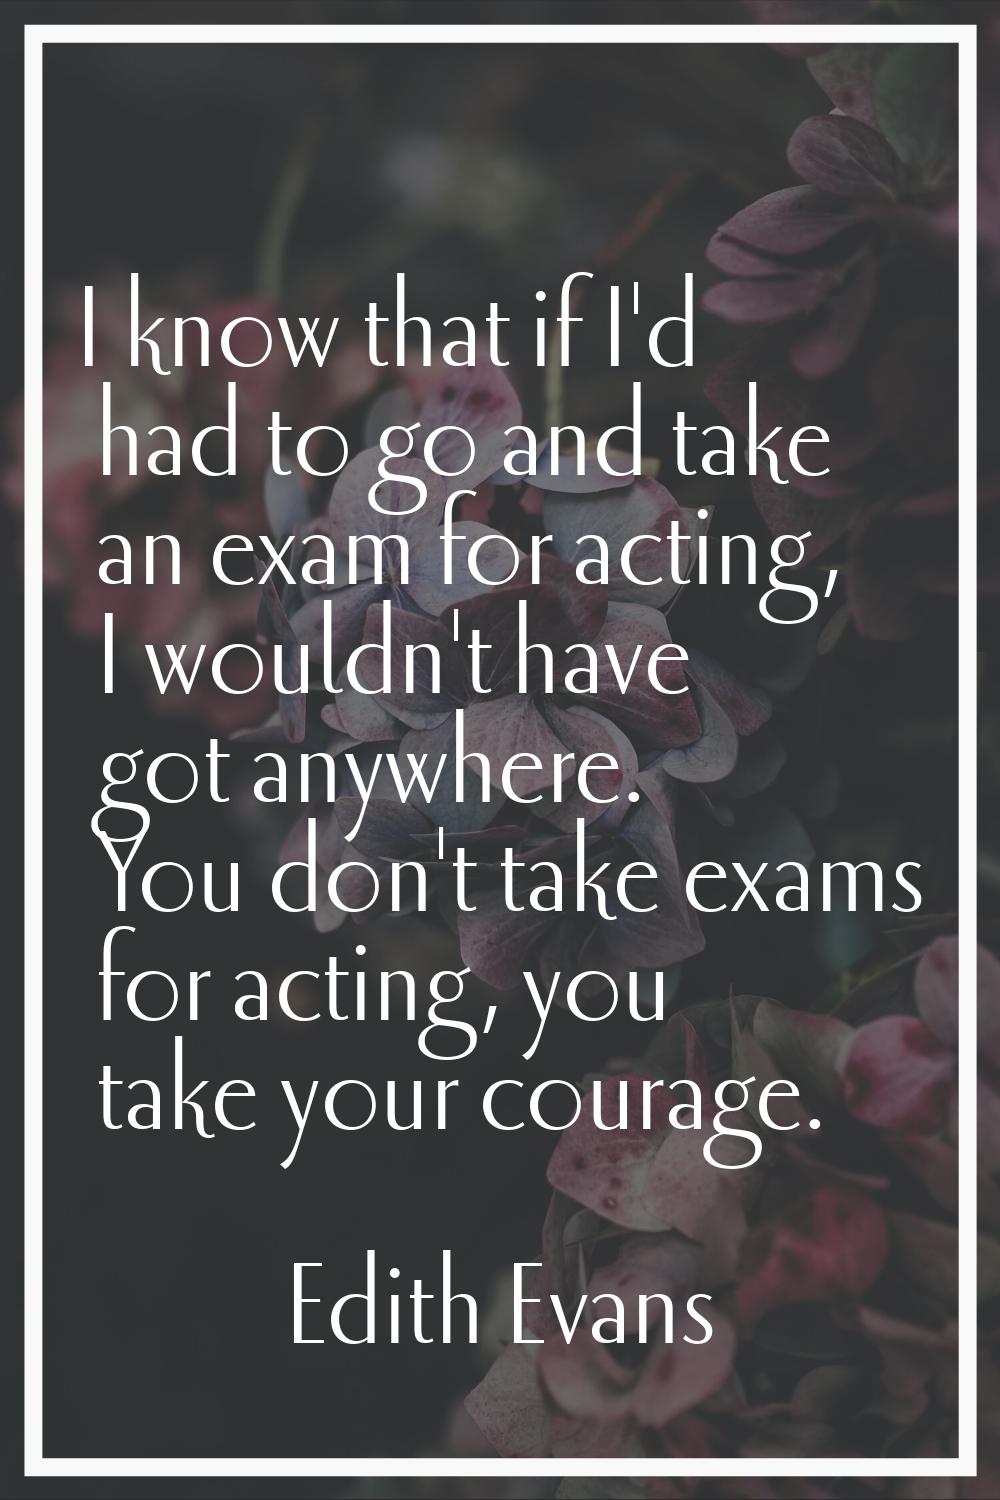 I know that if I'd had to go and take an exam for acting, I wouldn't have got anywhere. You don't t